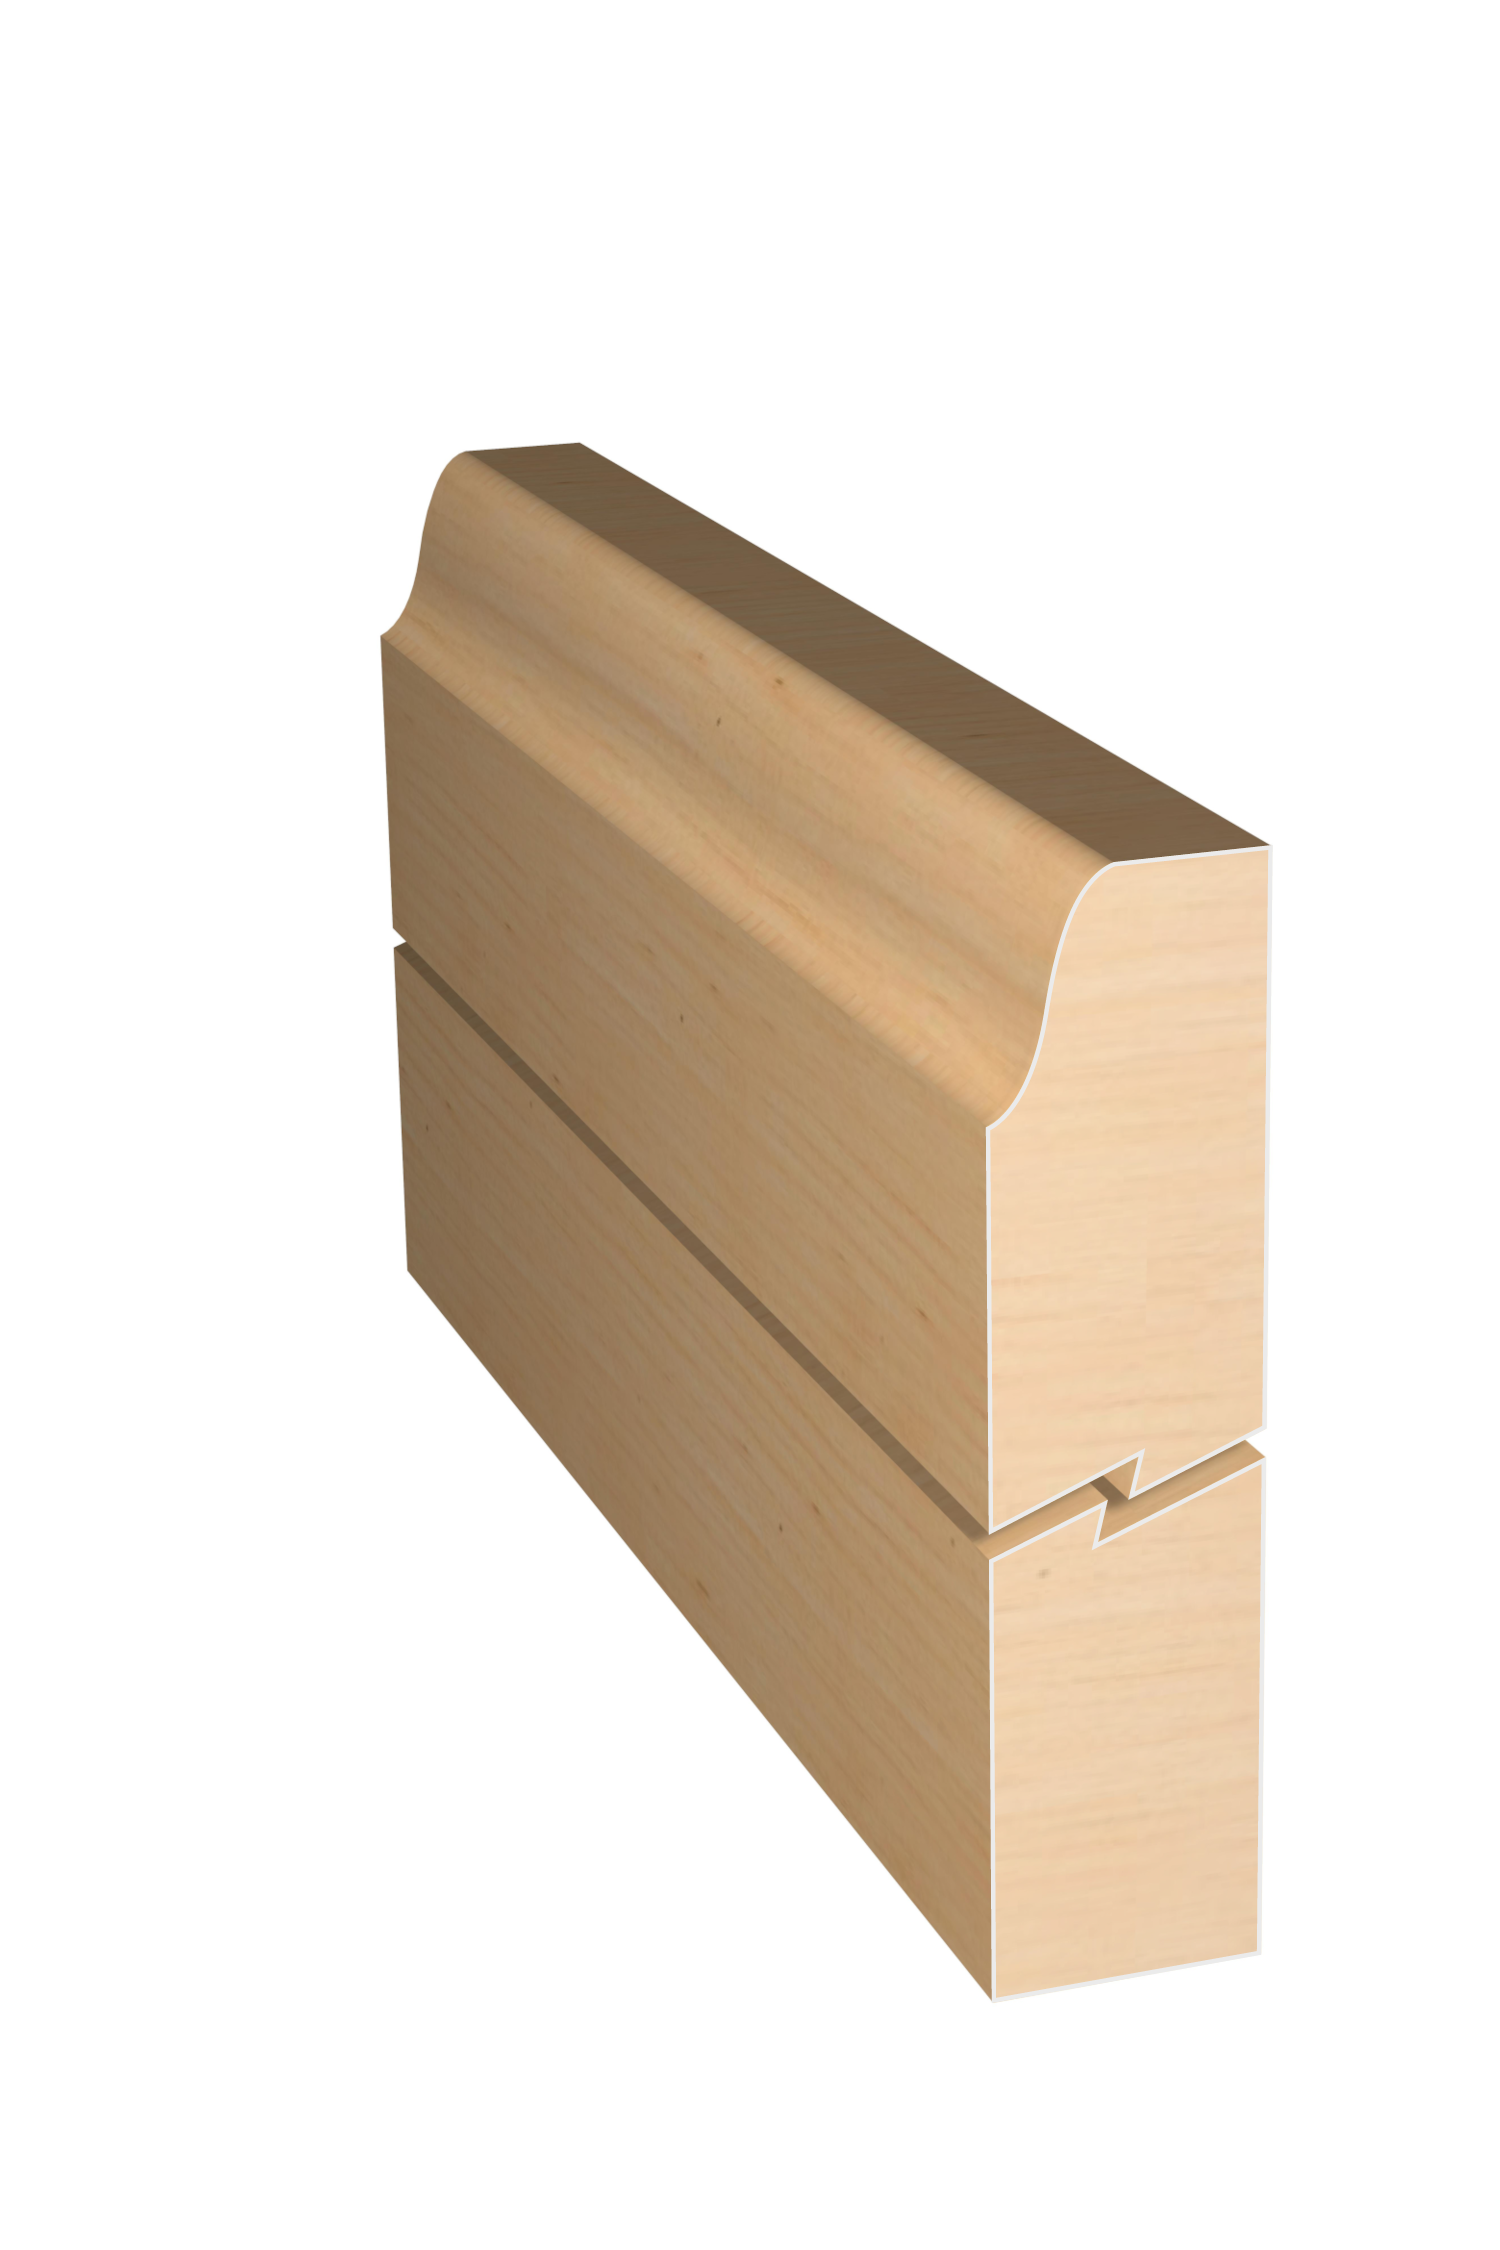 Three dimensional rendering of custom edge profile wood molding SKPL39 made by Public Lumber Company in Detroit.